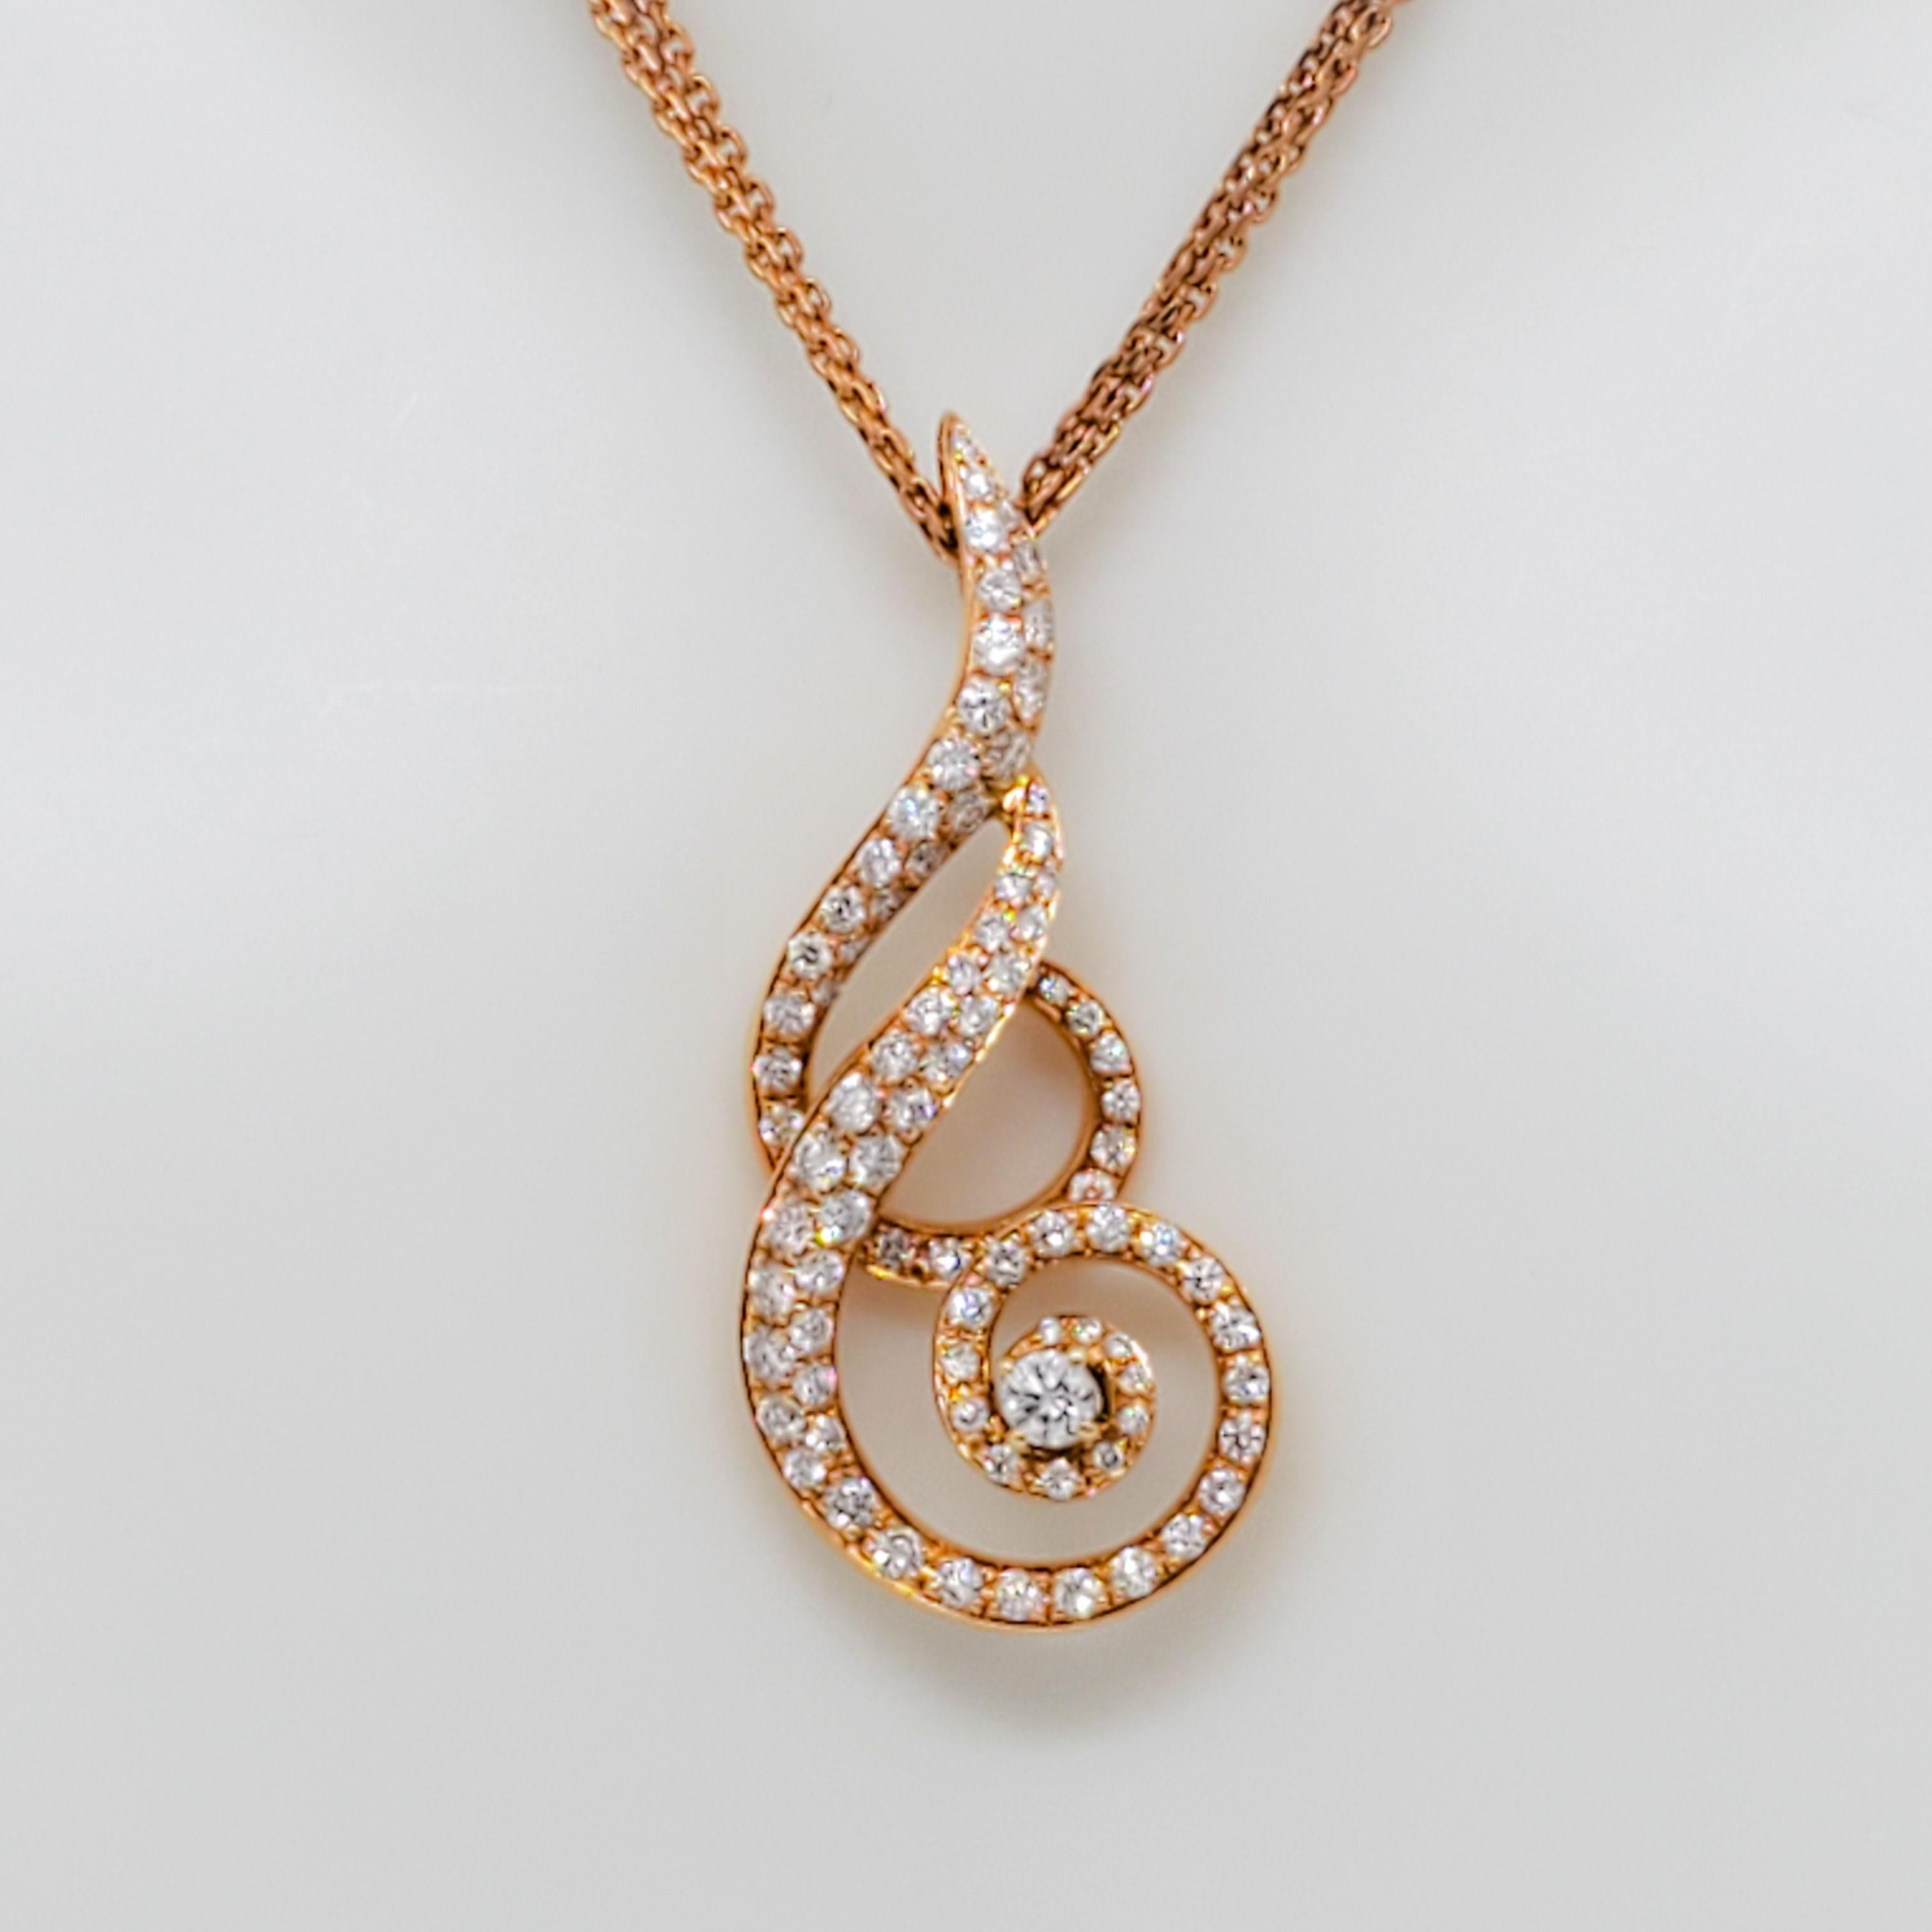 Beautiful pendant necklace with 0.81 ct. good quality white diamond rounds.  Handmade in 18k rose gold, 16